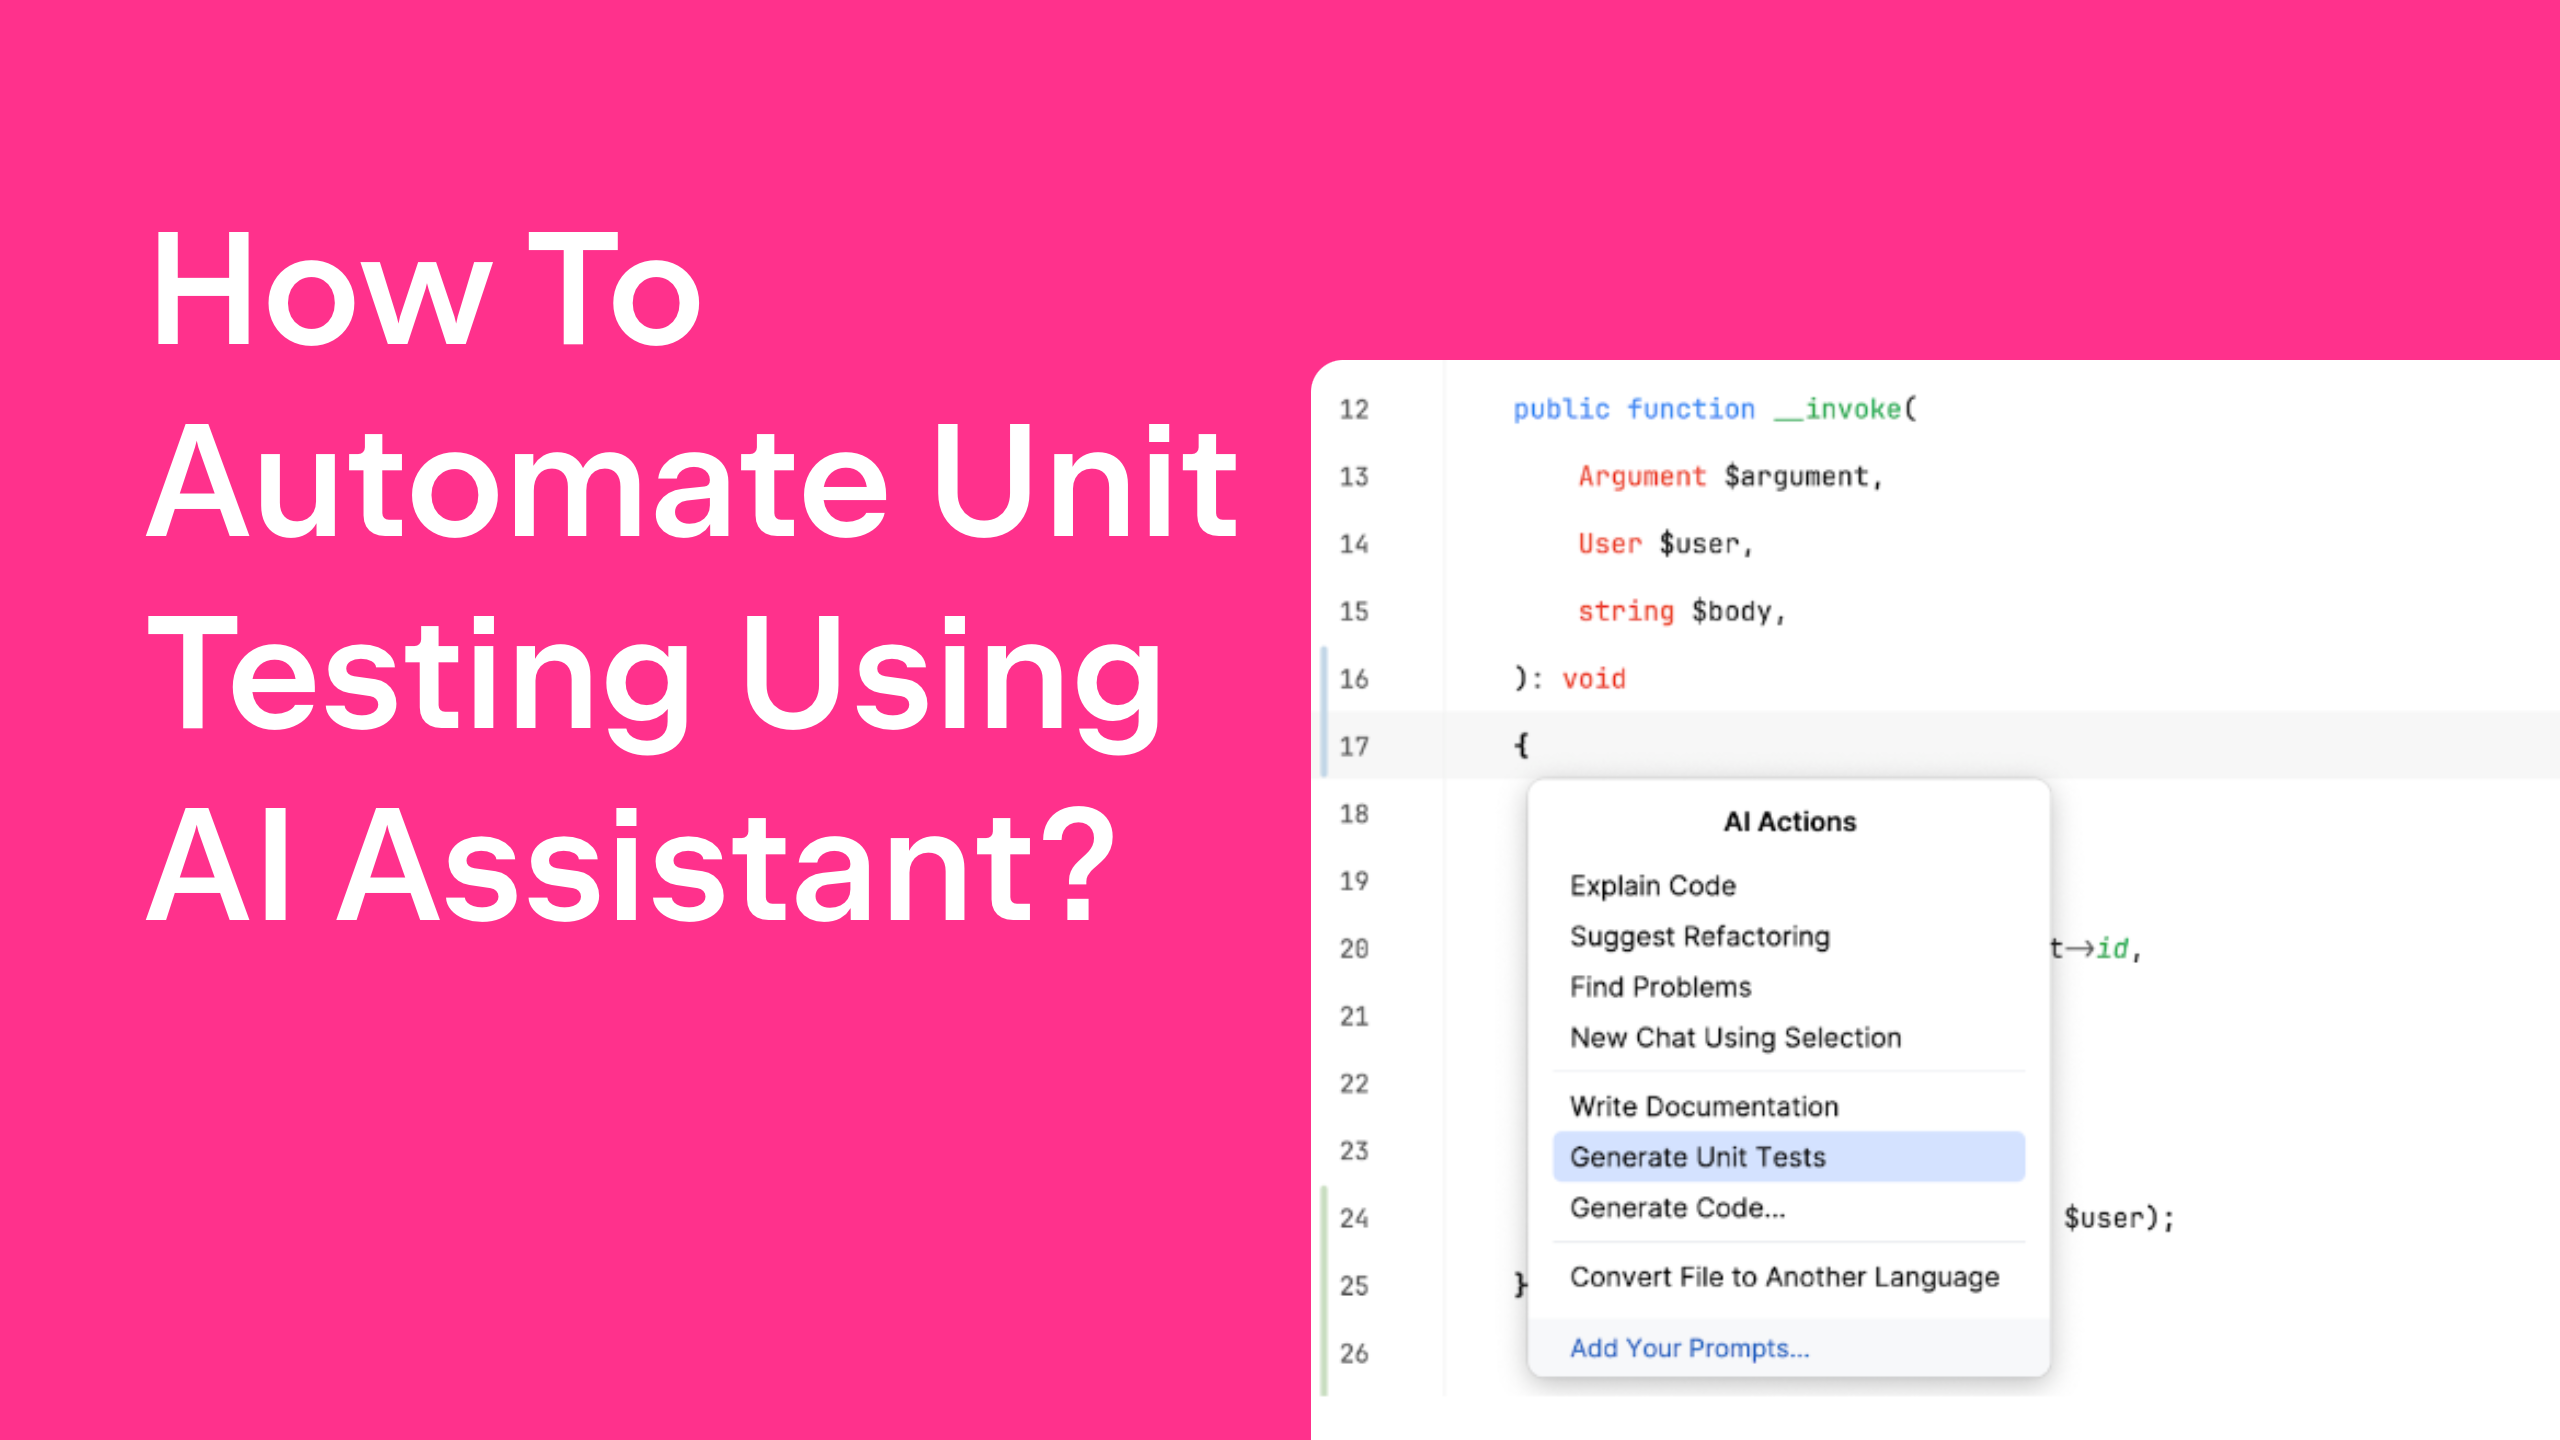 How To Automate Unit Testing Using AI Assistant?